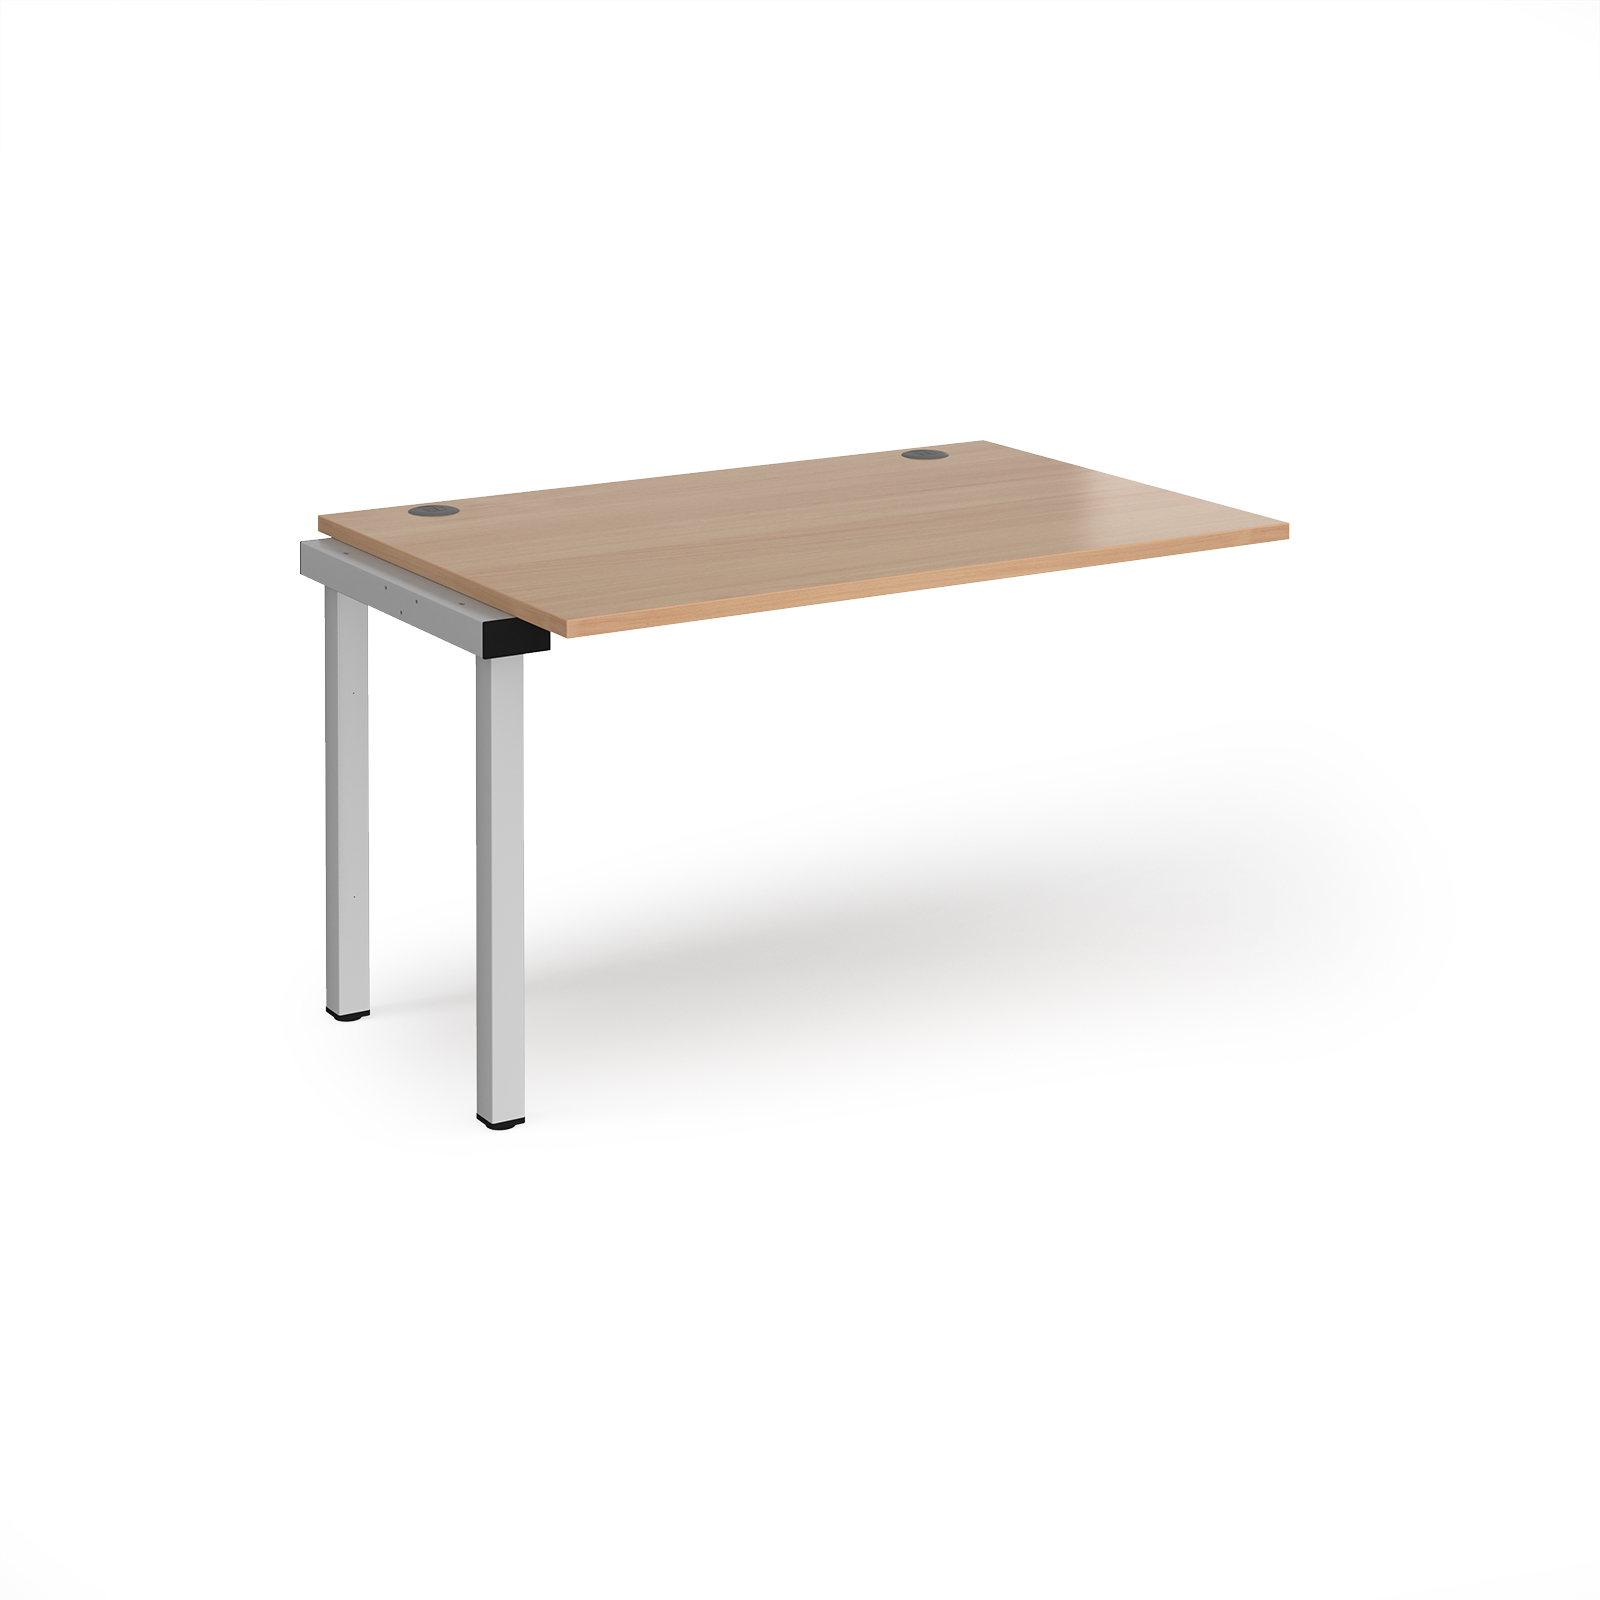 Connex add on unit single 1200mm x 800mm - silver frame, beech top